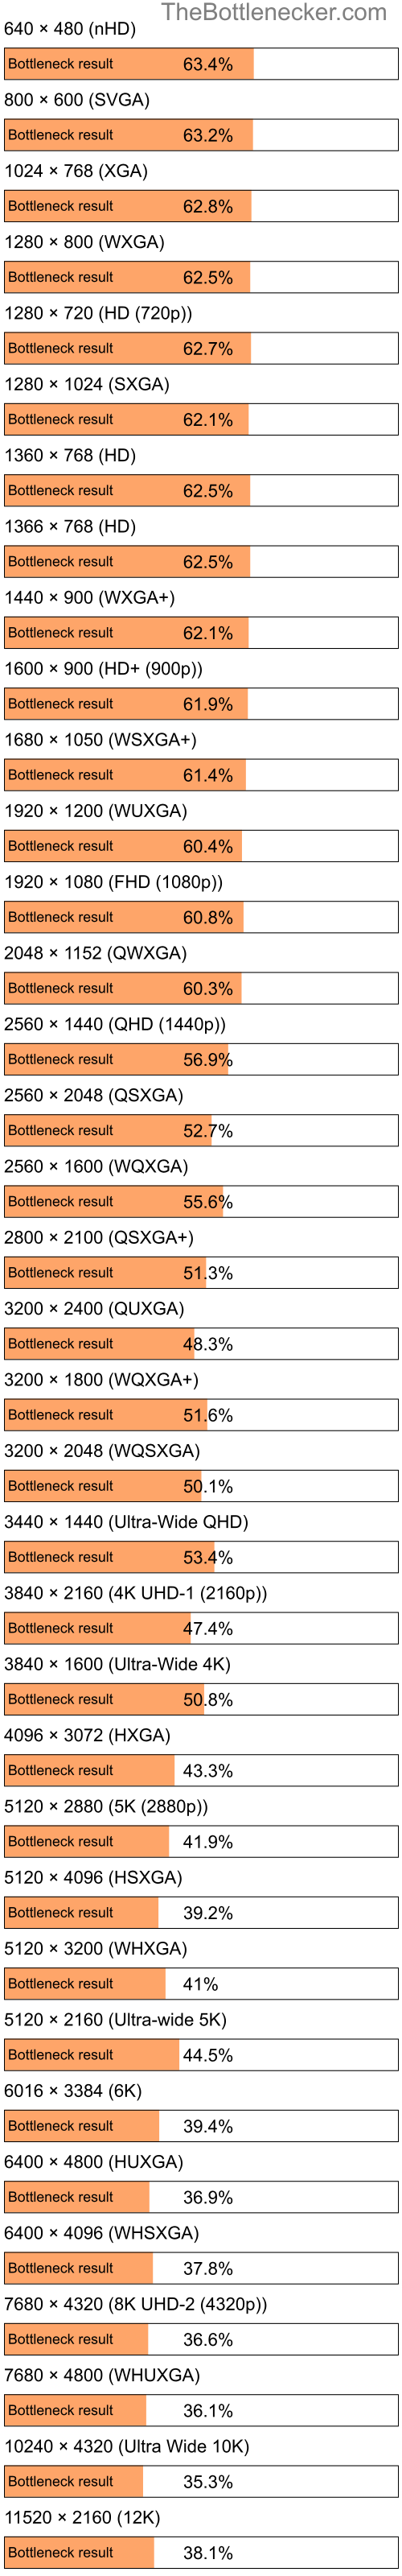 Bottleneck results by resolution for AMD PRO A4-3350B and NVIDIA GeForce RTX 4060 in Graphic Card Intense Tasks